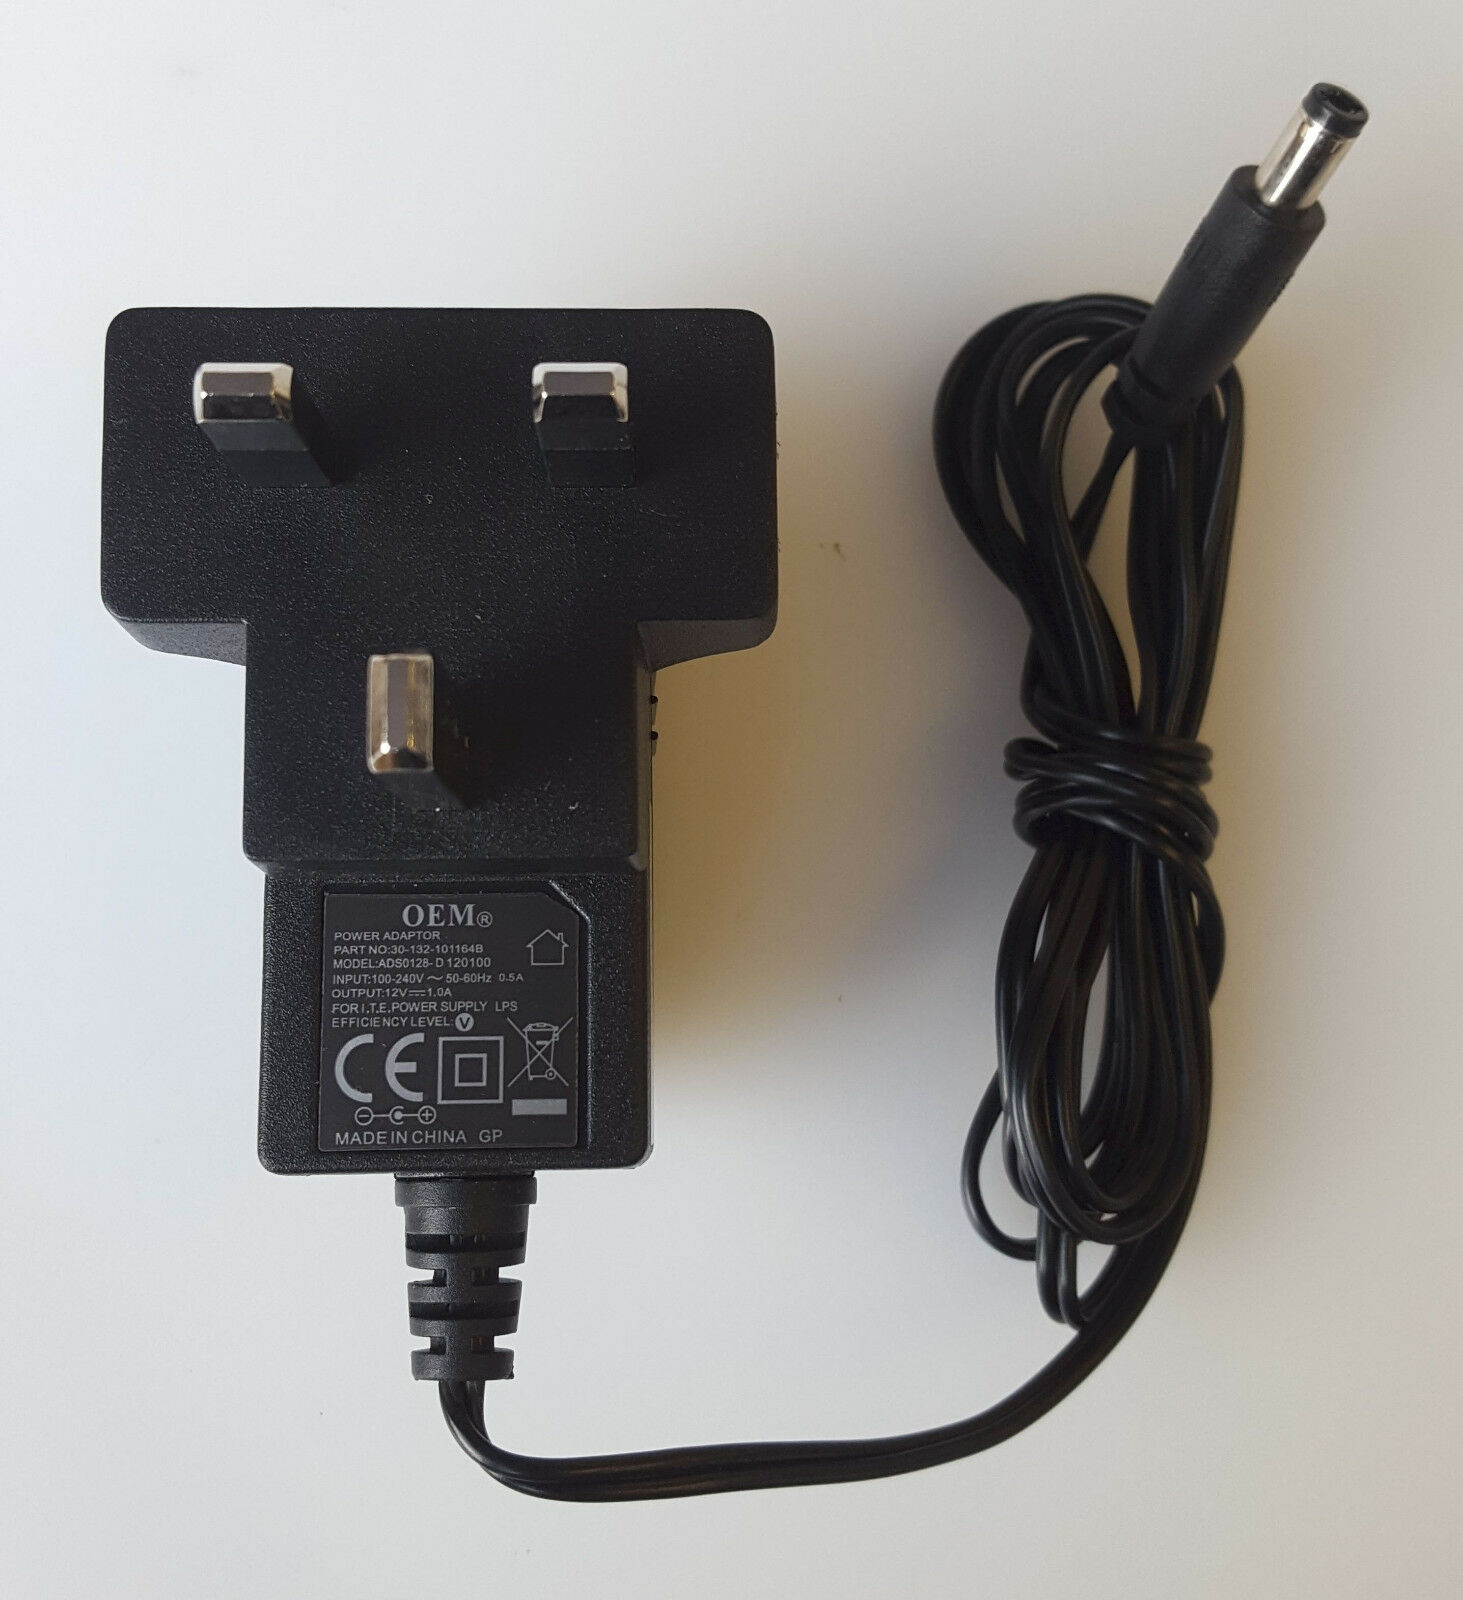 OEM ADS0128-D 120100 AC/DC POWER SUPPLY ADAPTER 12V 1.0A 30-132-101164B UK PLUG Country/Region of Manufacture: China O - Click Image to Close